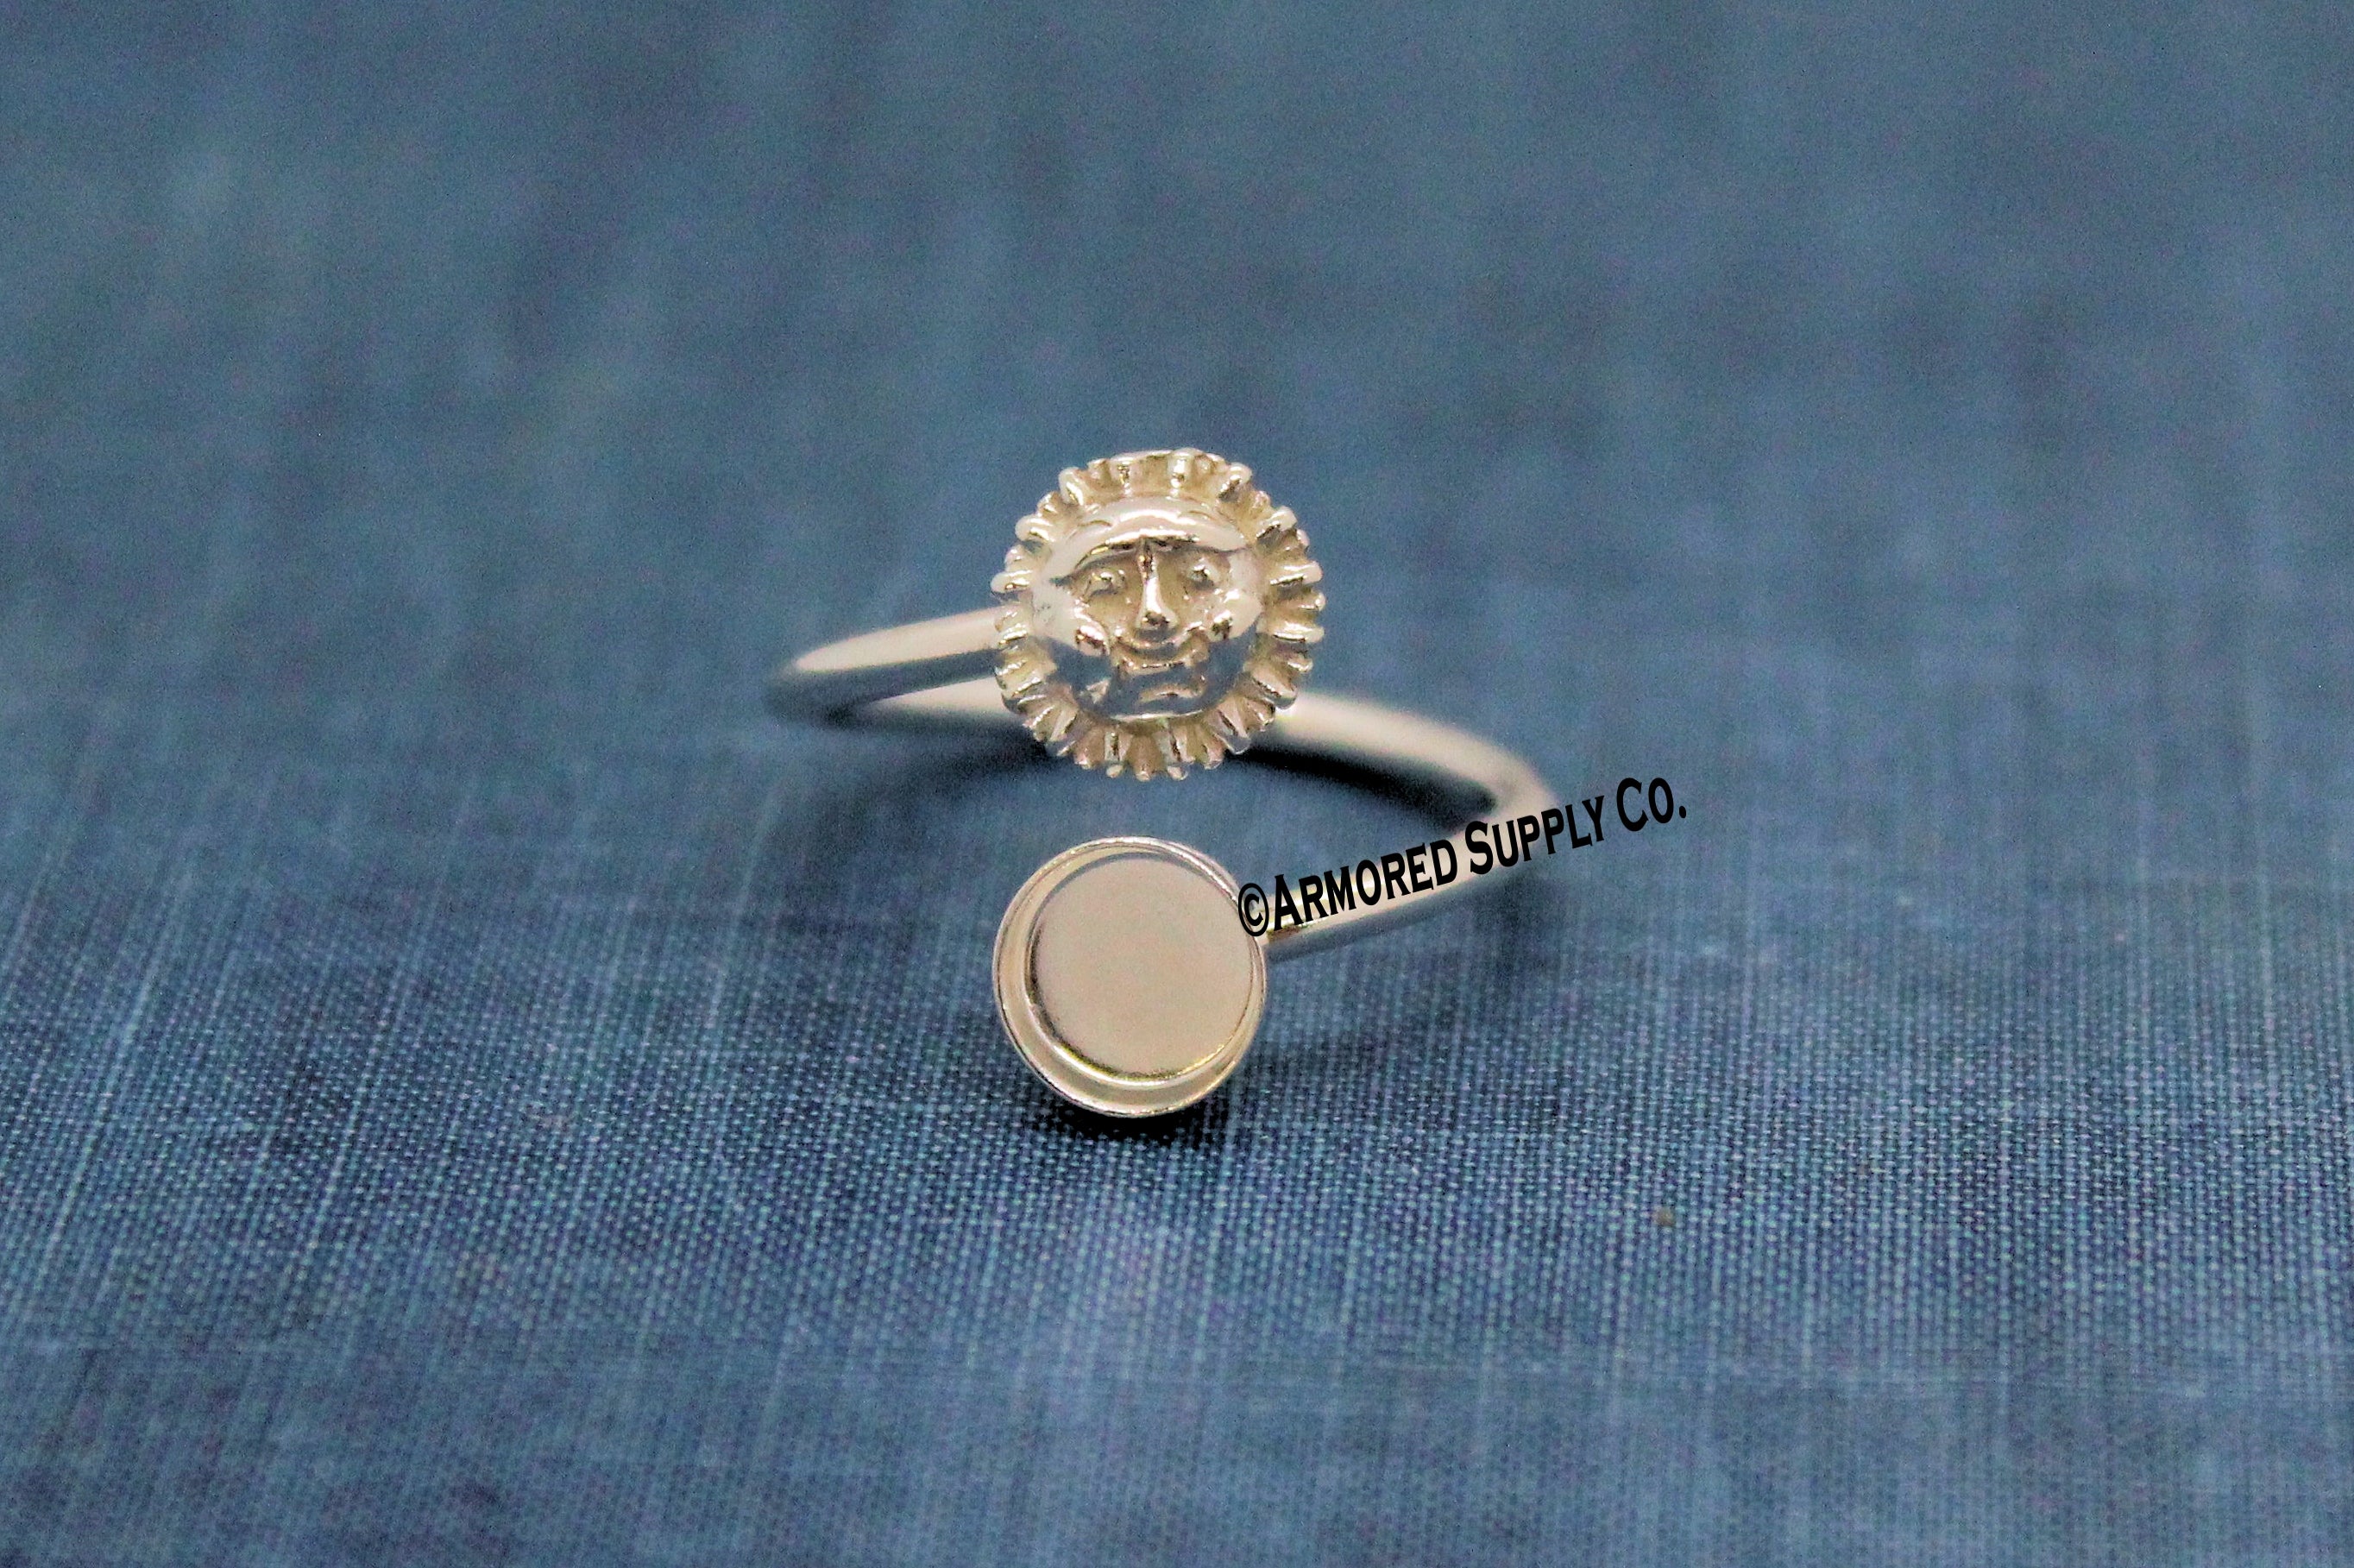 7mm Bezel Sterling Silver Smiling Sun Wrap Bypass Adjustable Ring blank